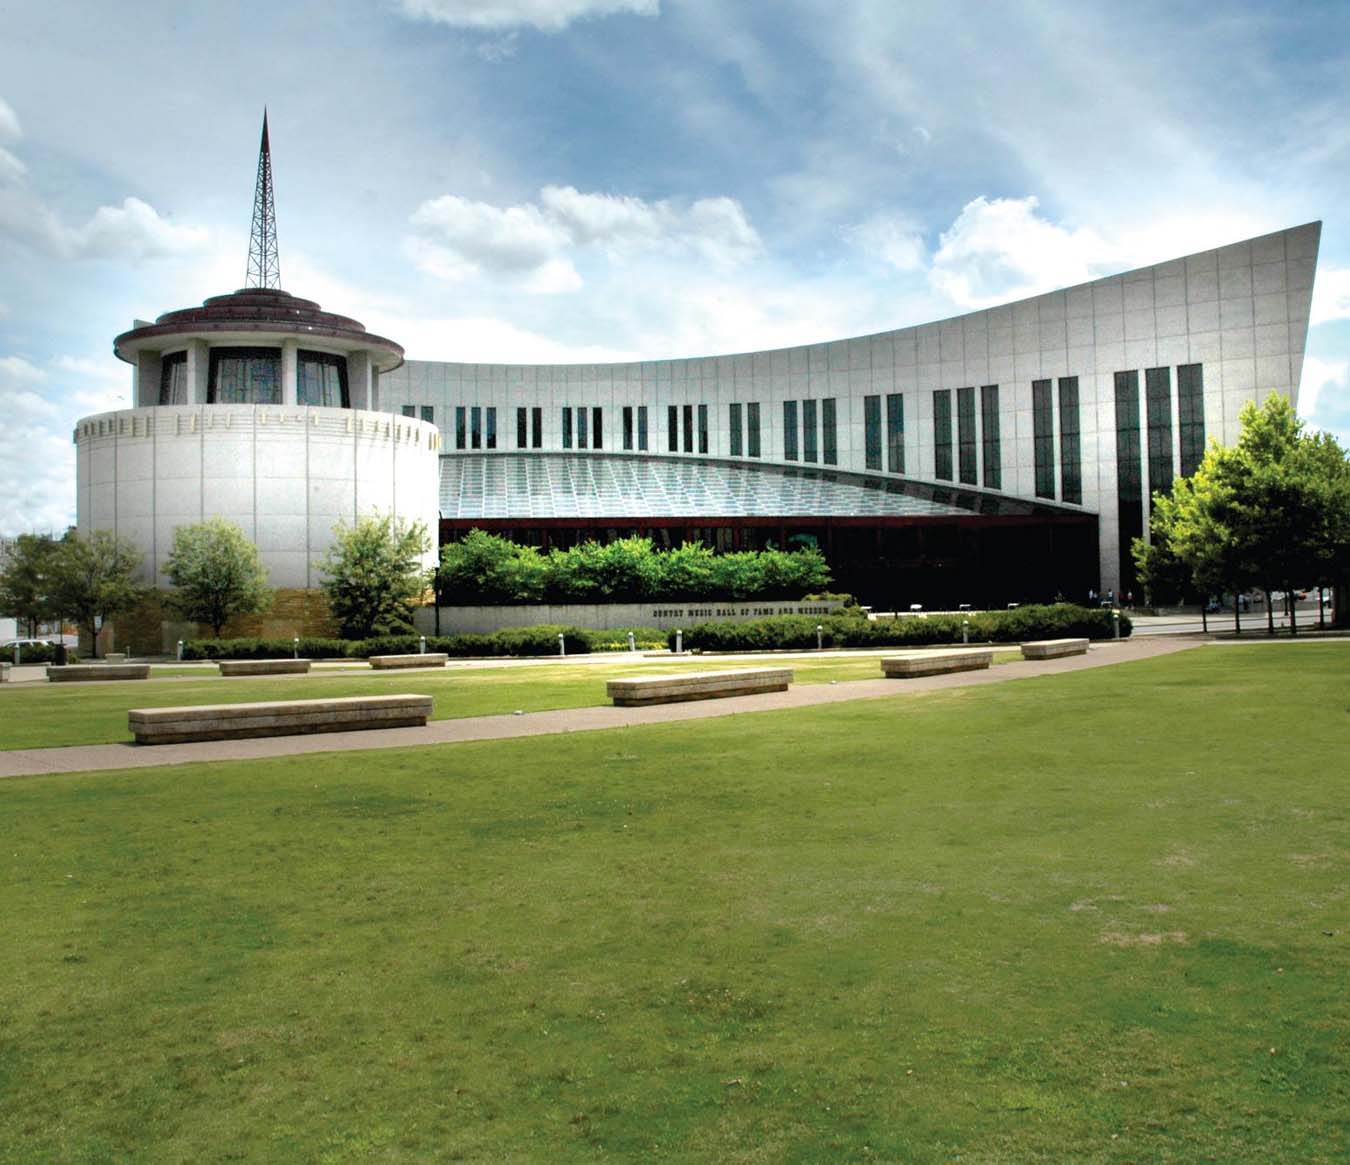 Things to Do in Nashville - Country Music Hall of Fame and Museum